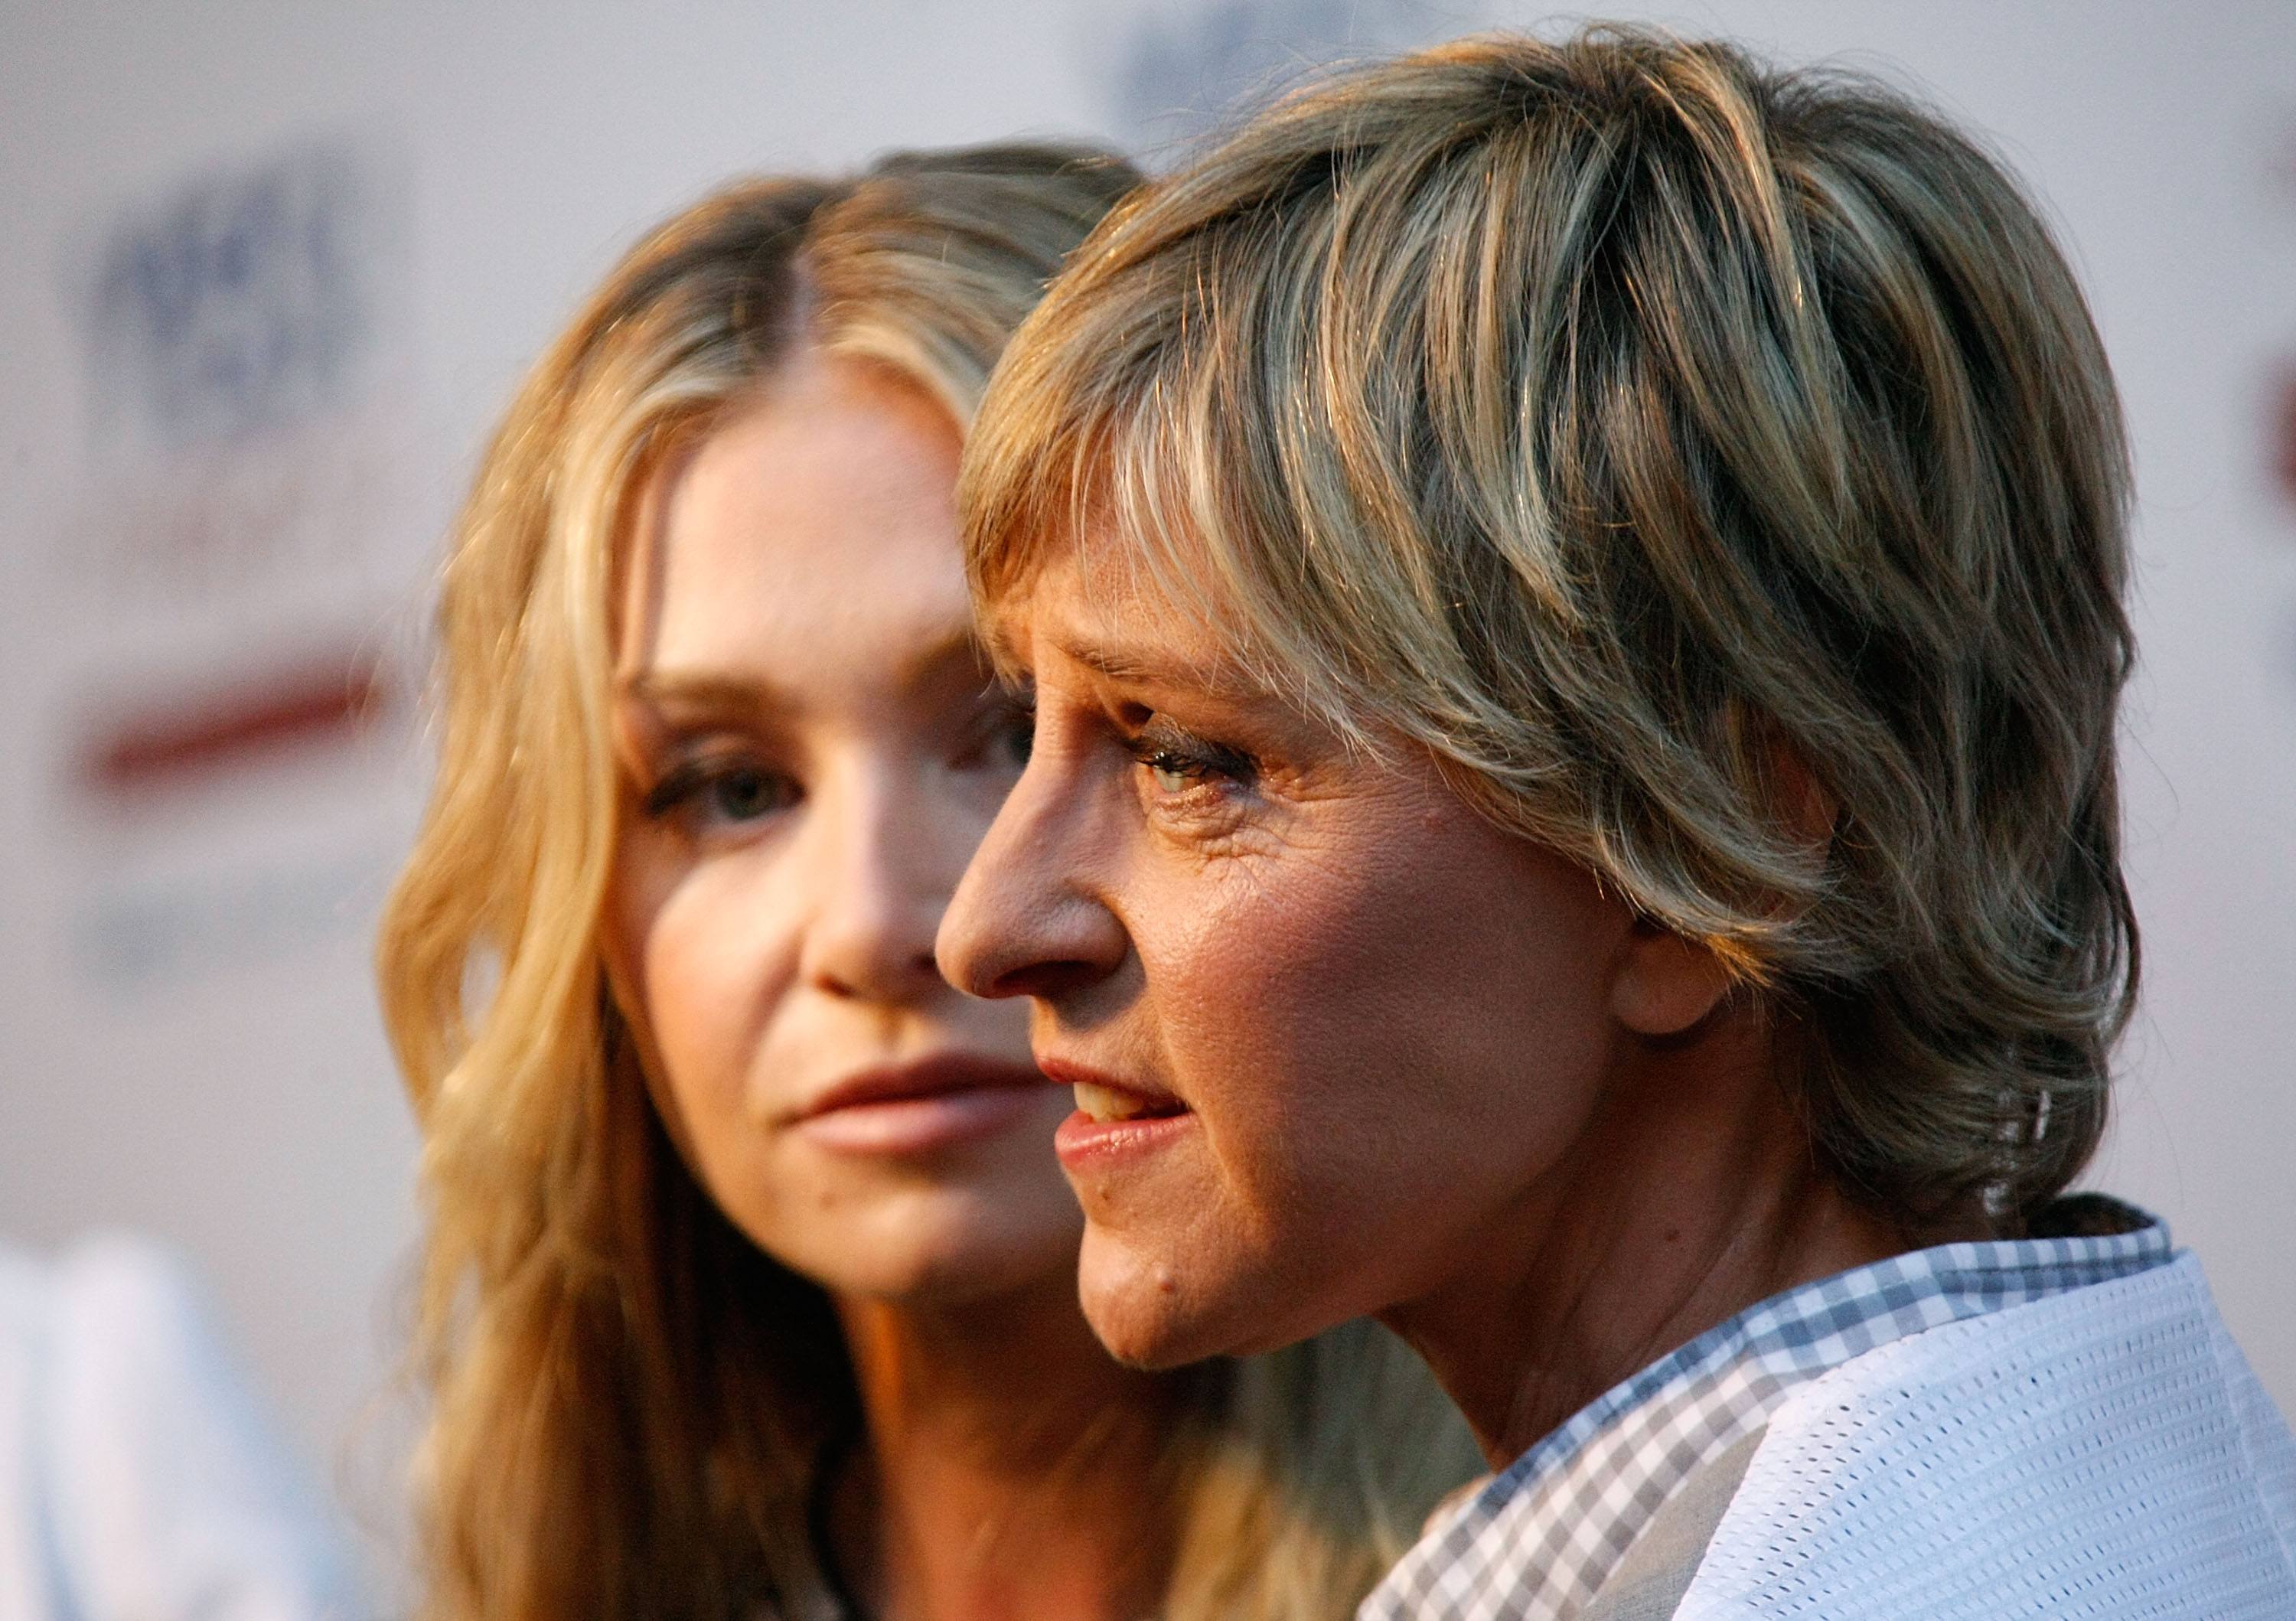 Actress Portia de Rossi (L) and comedian Ellen DeGenerse arrive at the Yes! on Prop 2 Party at a private residence on September 28, 2008 in Los Angeles, California.